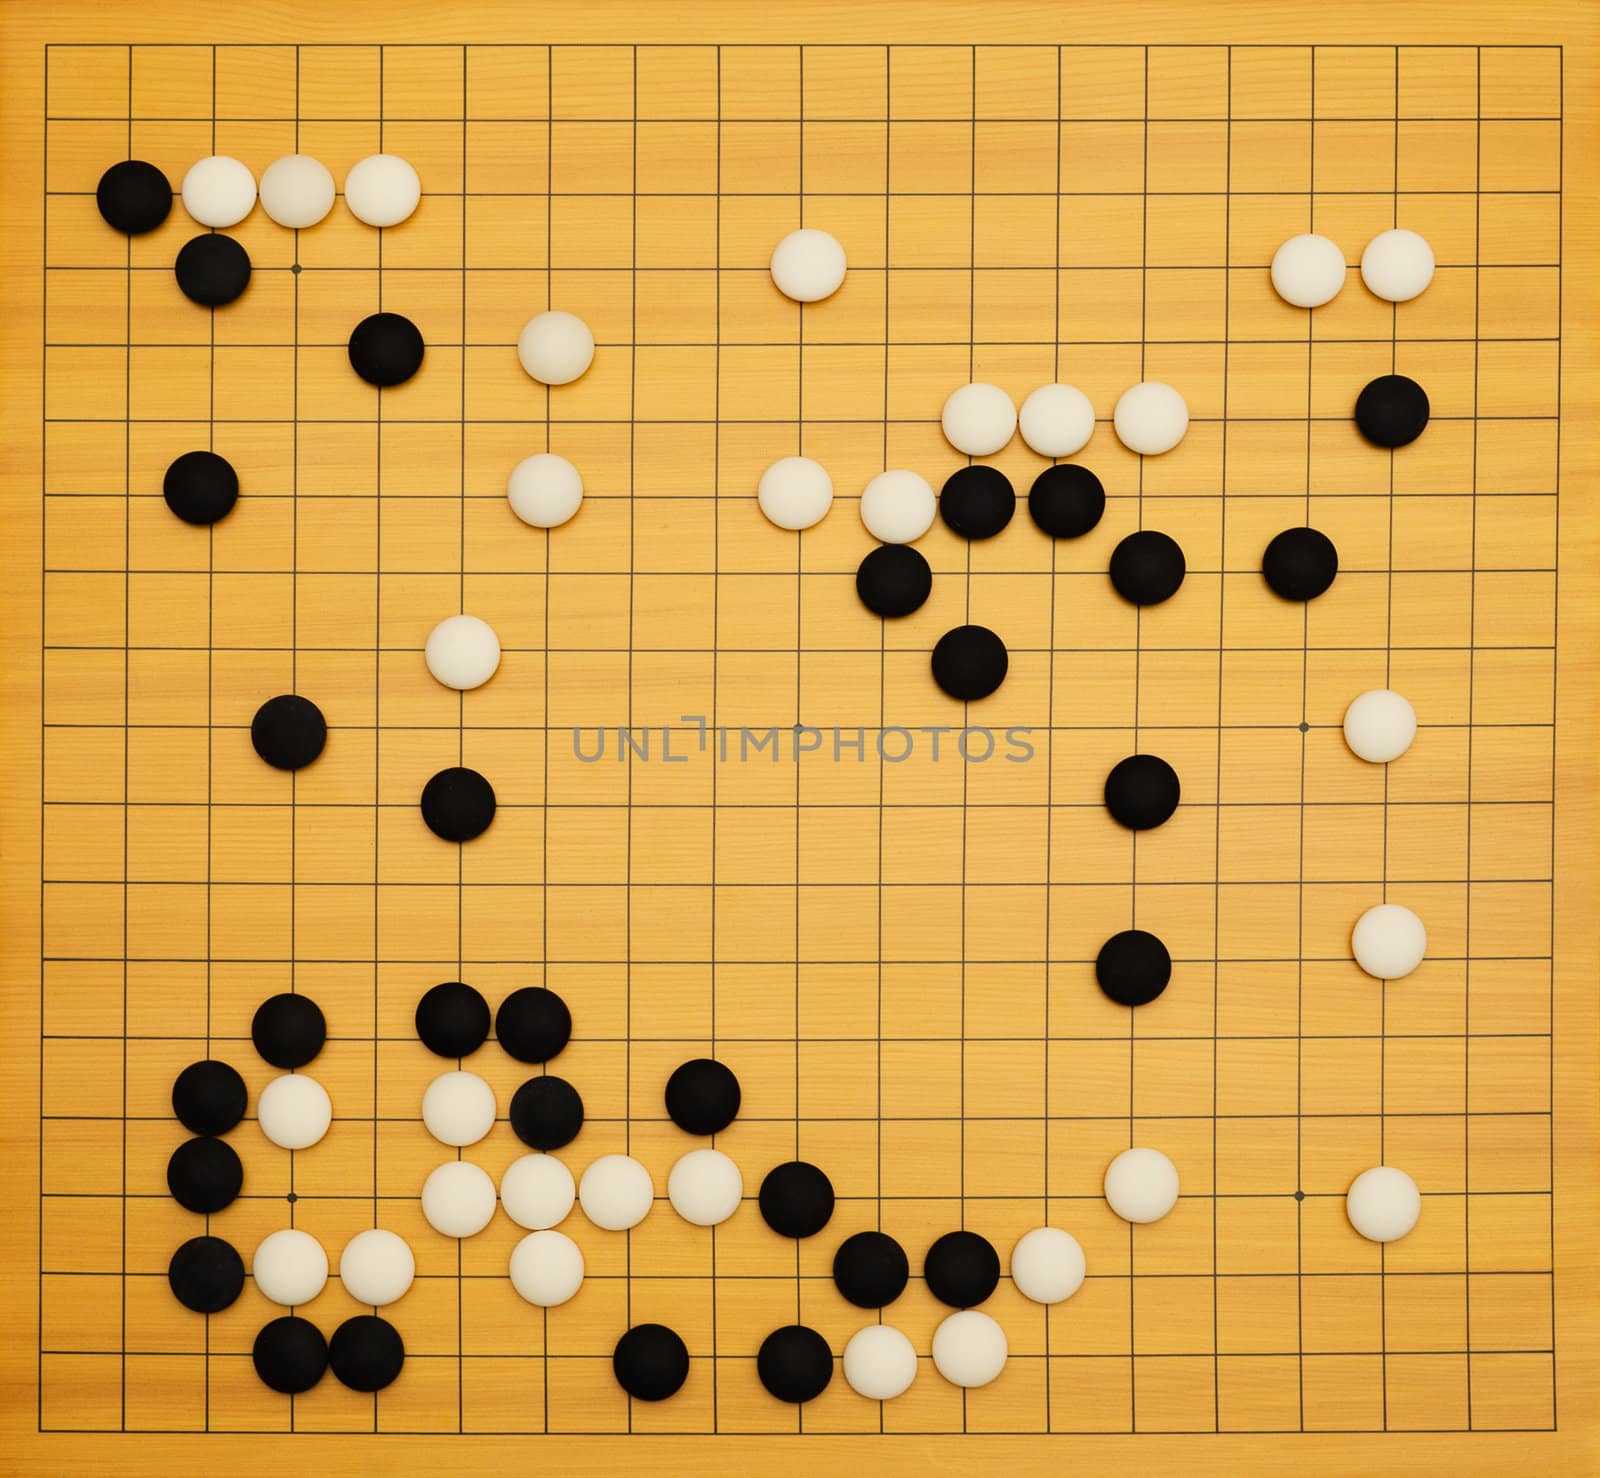 Top view of a running game of go.